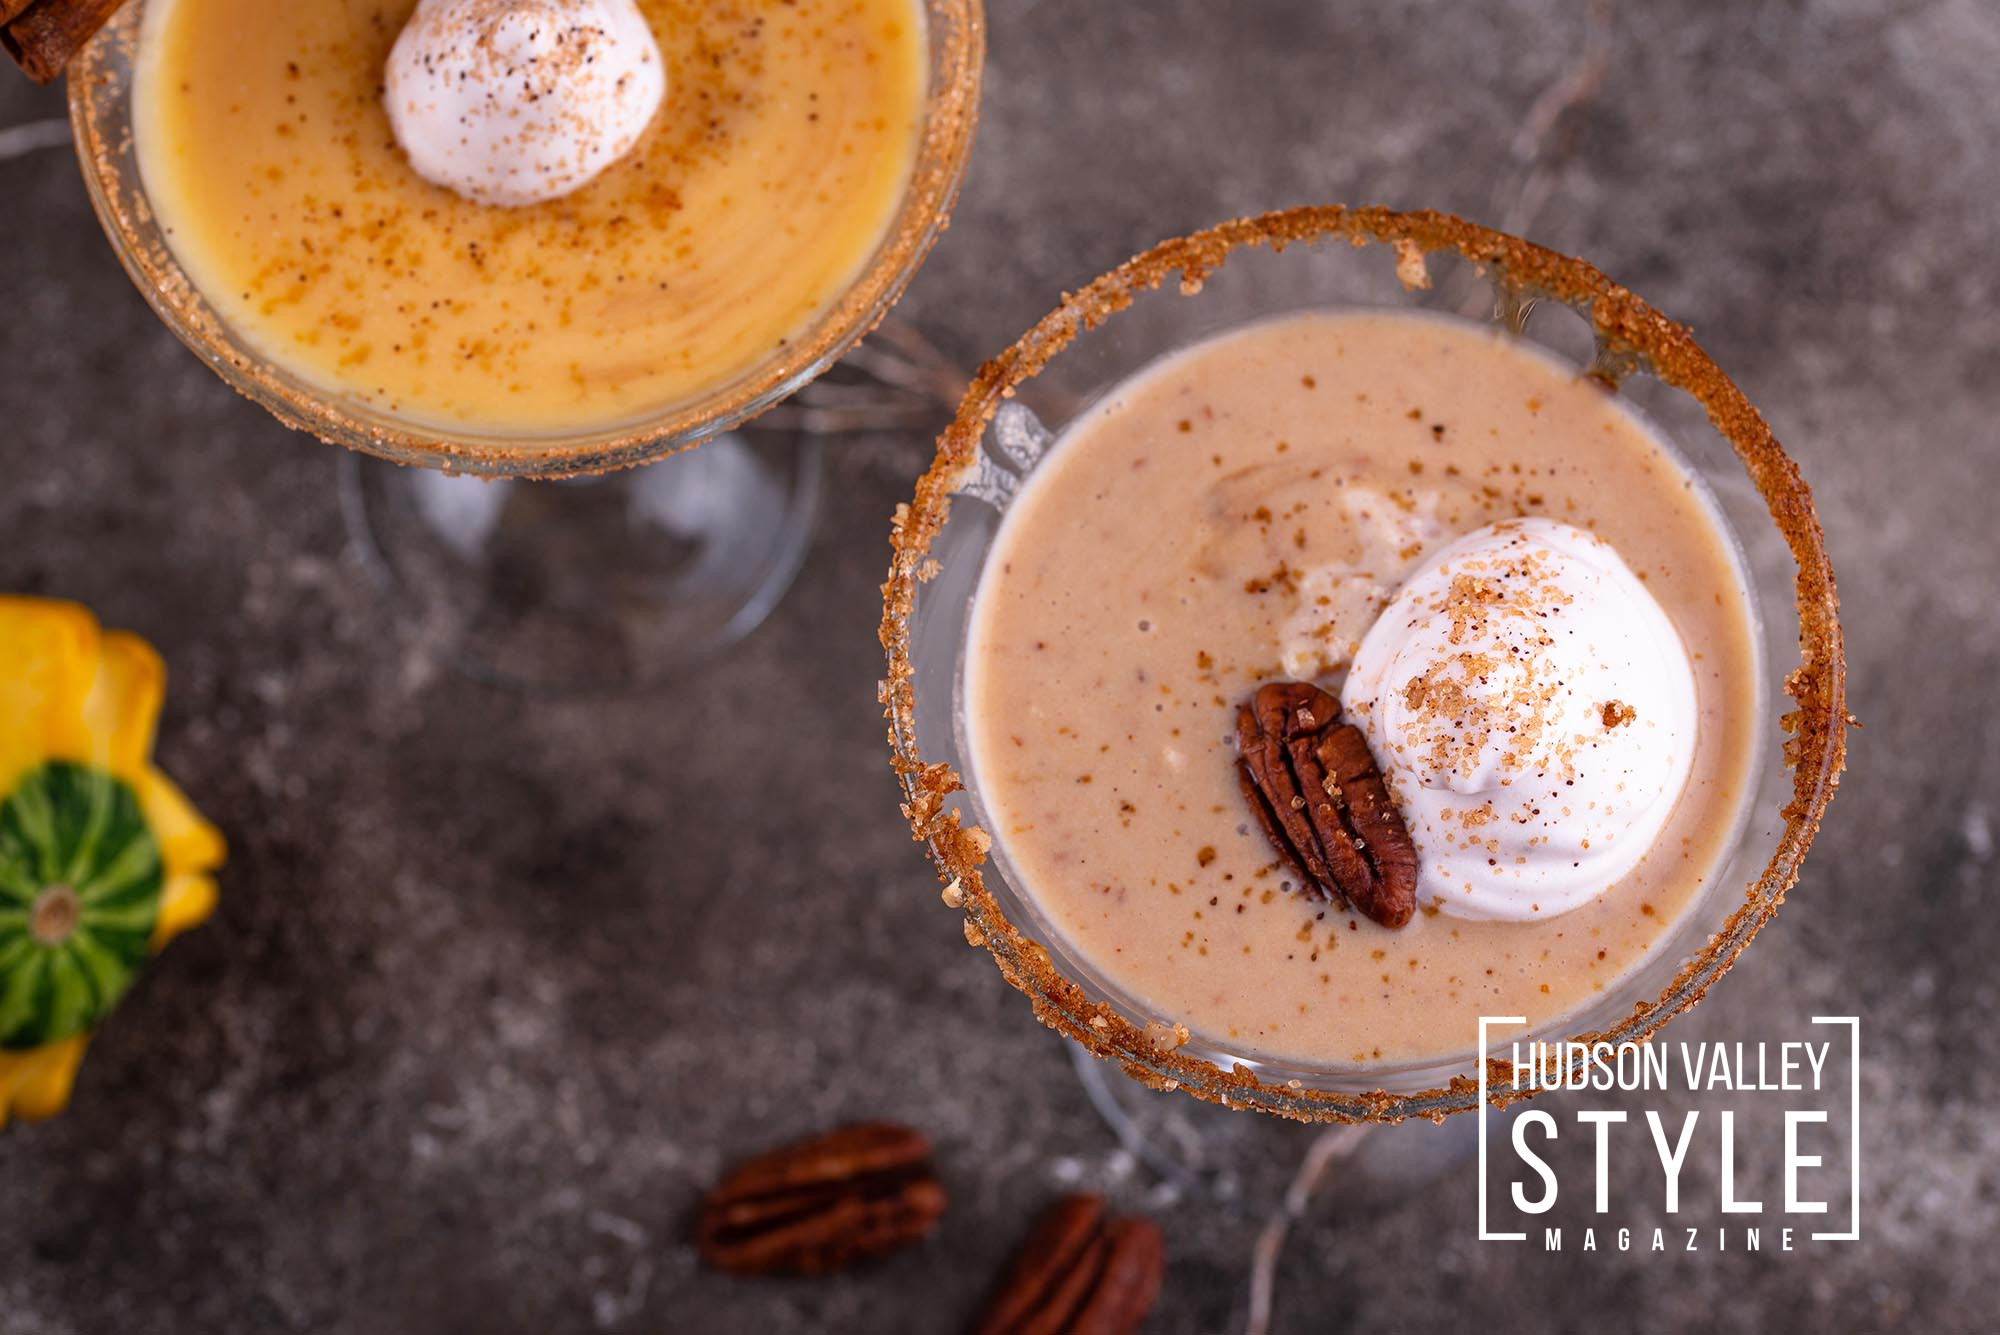 Fall Mixology in the Hudson Valley: The Creamy Pumpkin-Pecan Martini and More! – Presented by Alluvion Vacations – The Best Airbnb Getaways in the Hudson Valley and Catskills